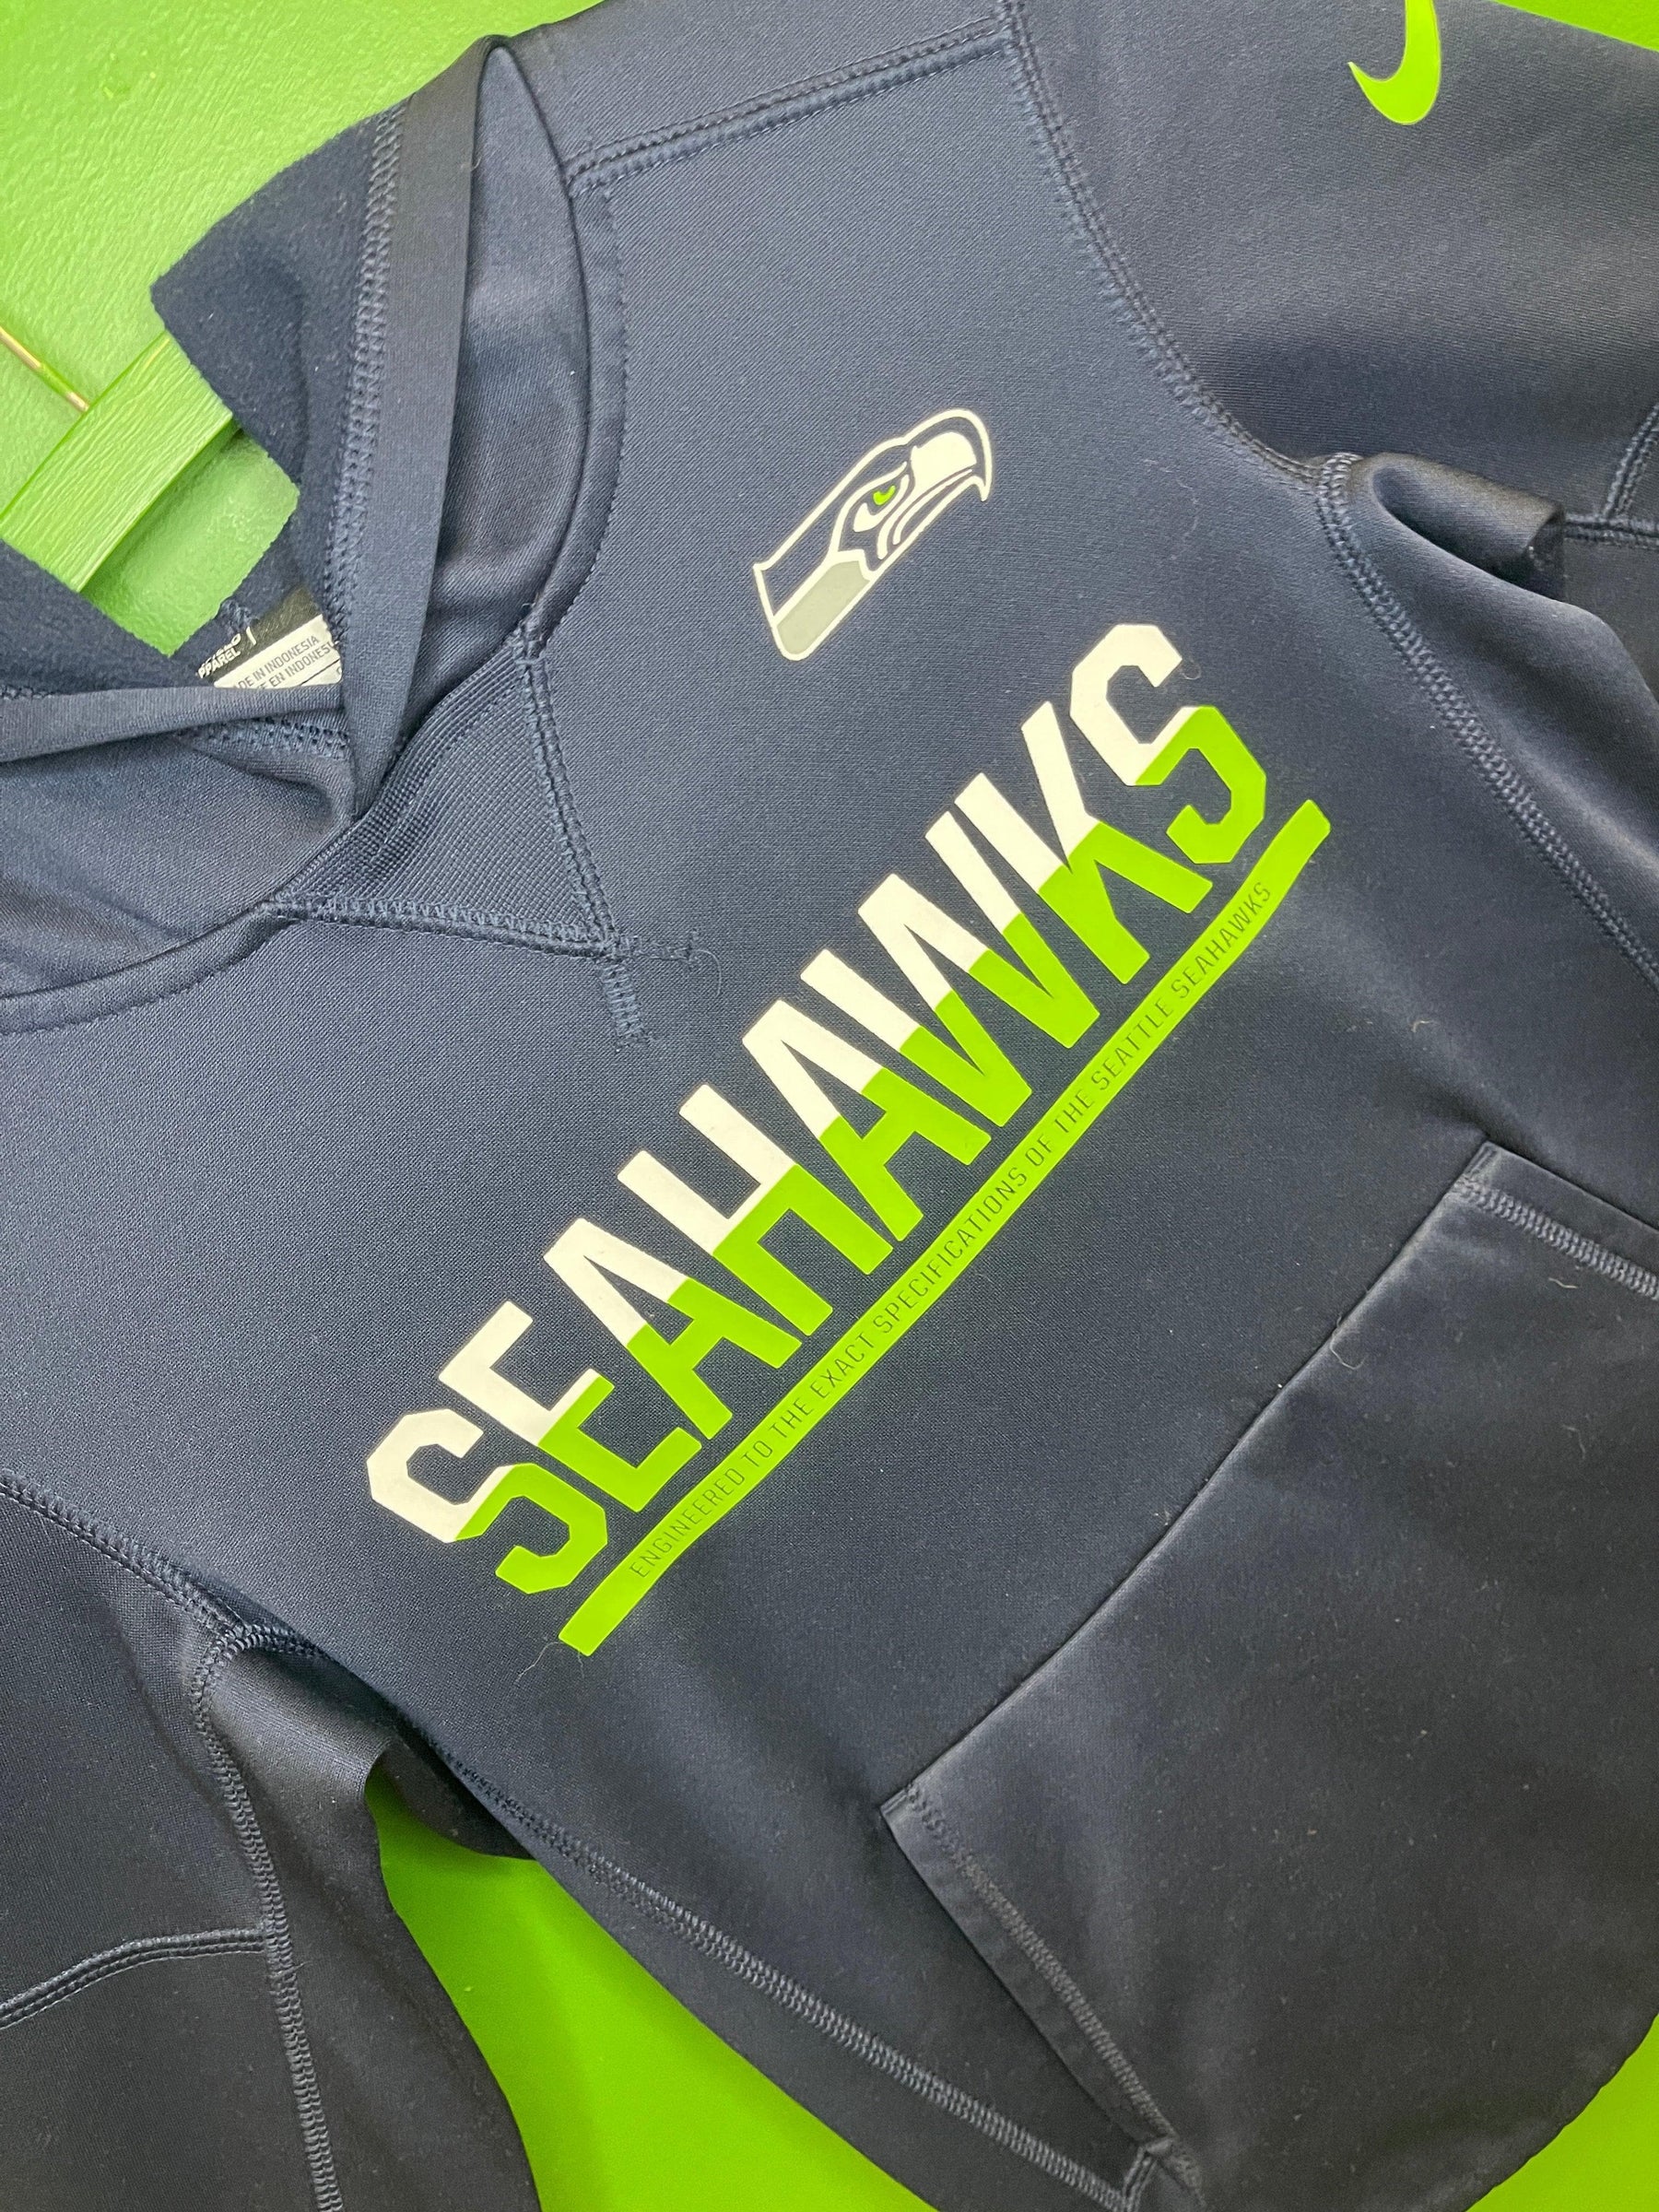 NFL Seattle Seahawks Insulated Pullover Hoodie Sweatshirt Youth Small 8